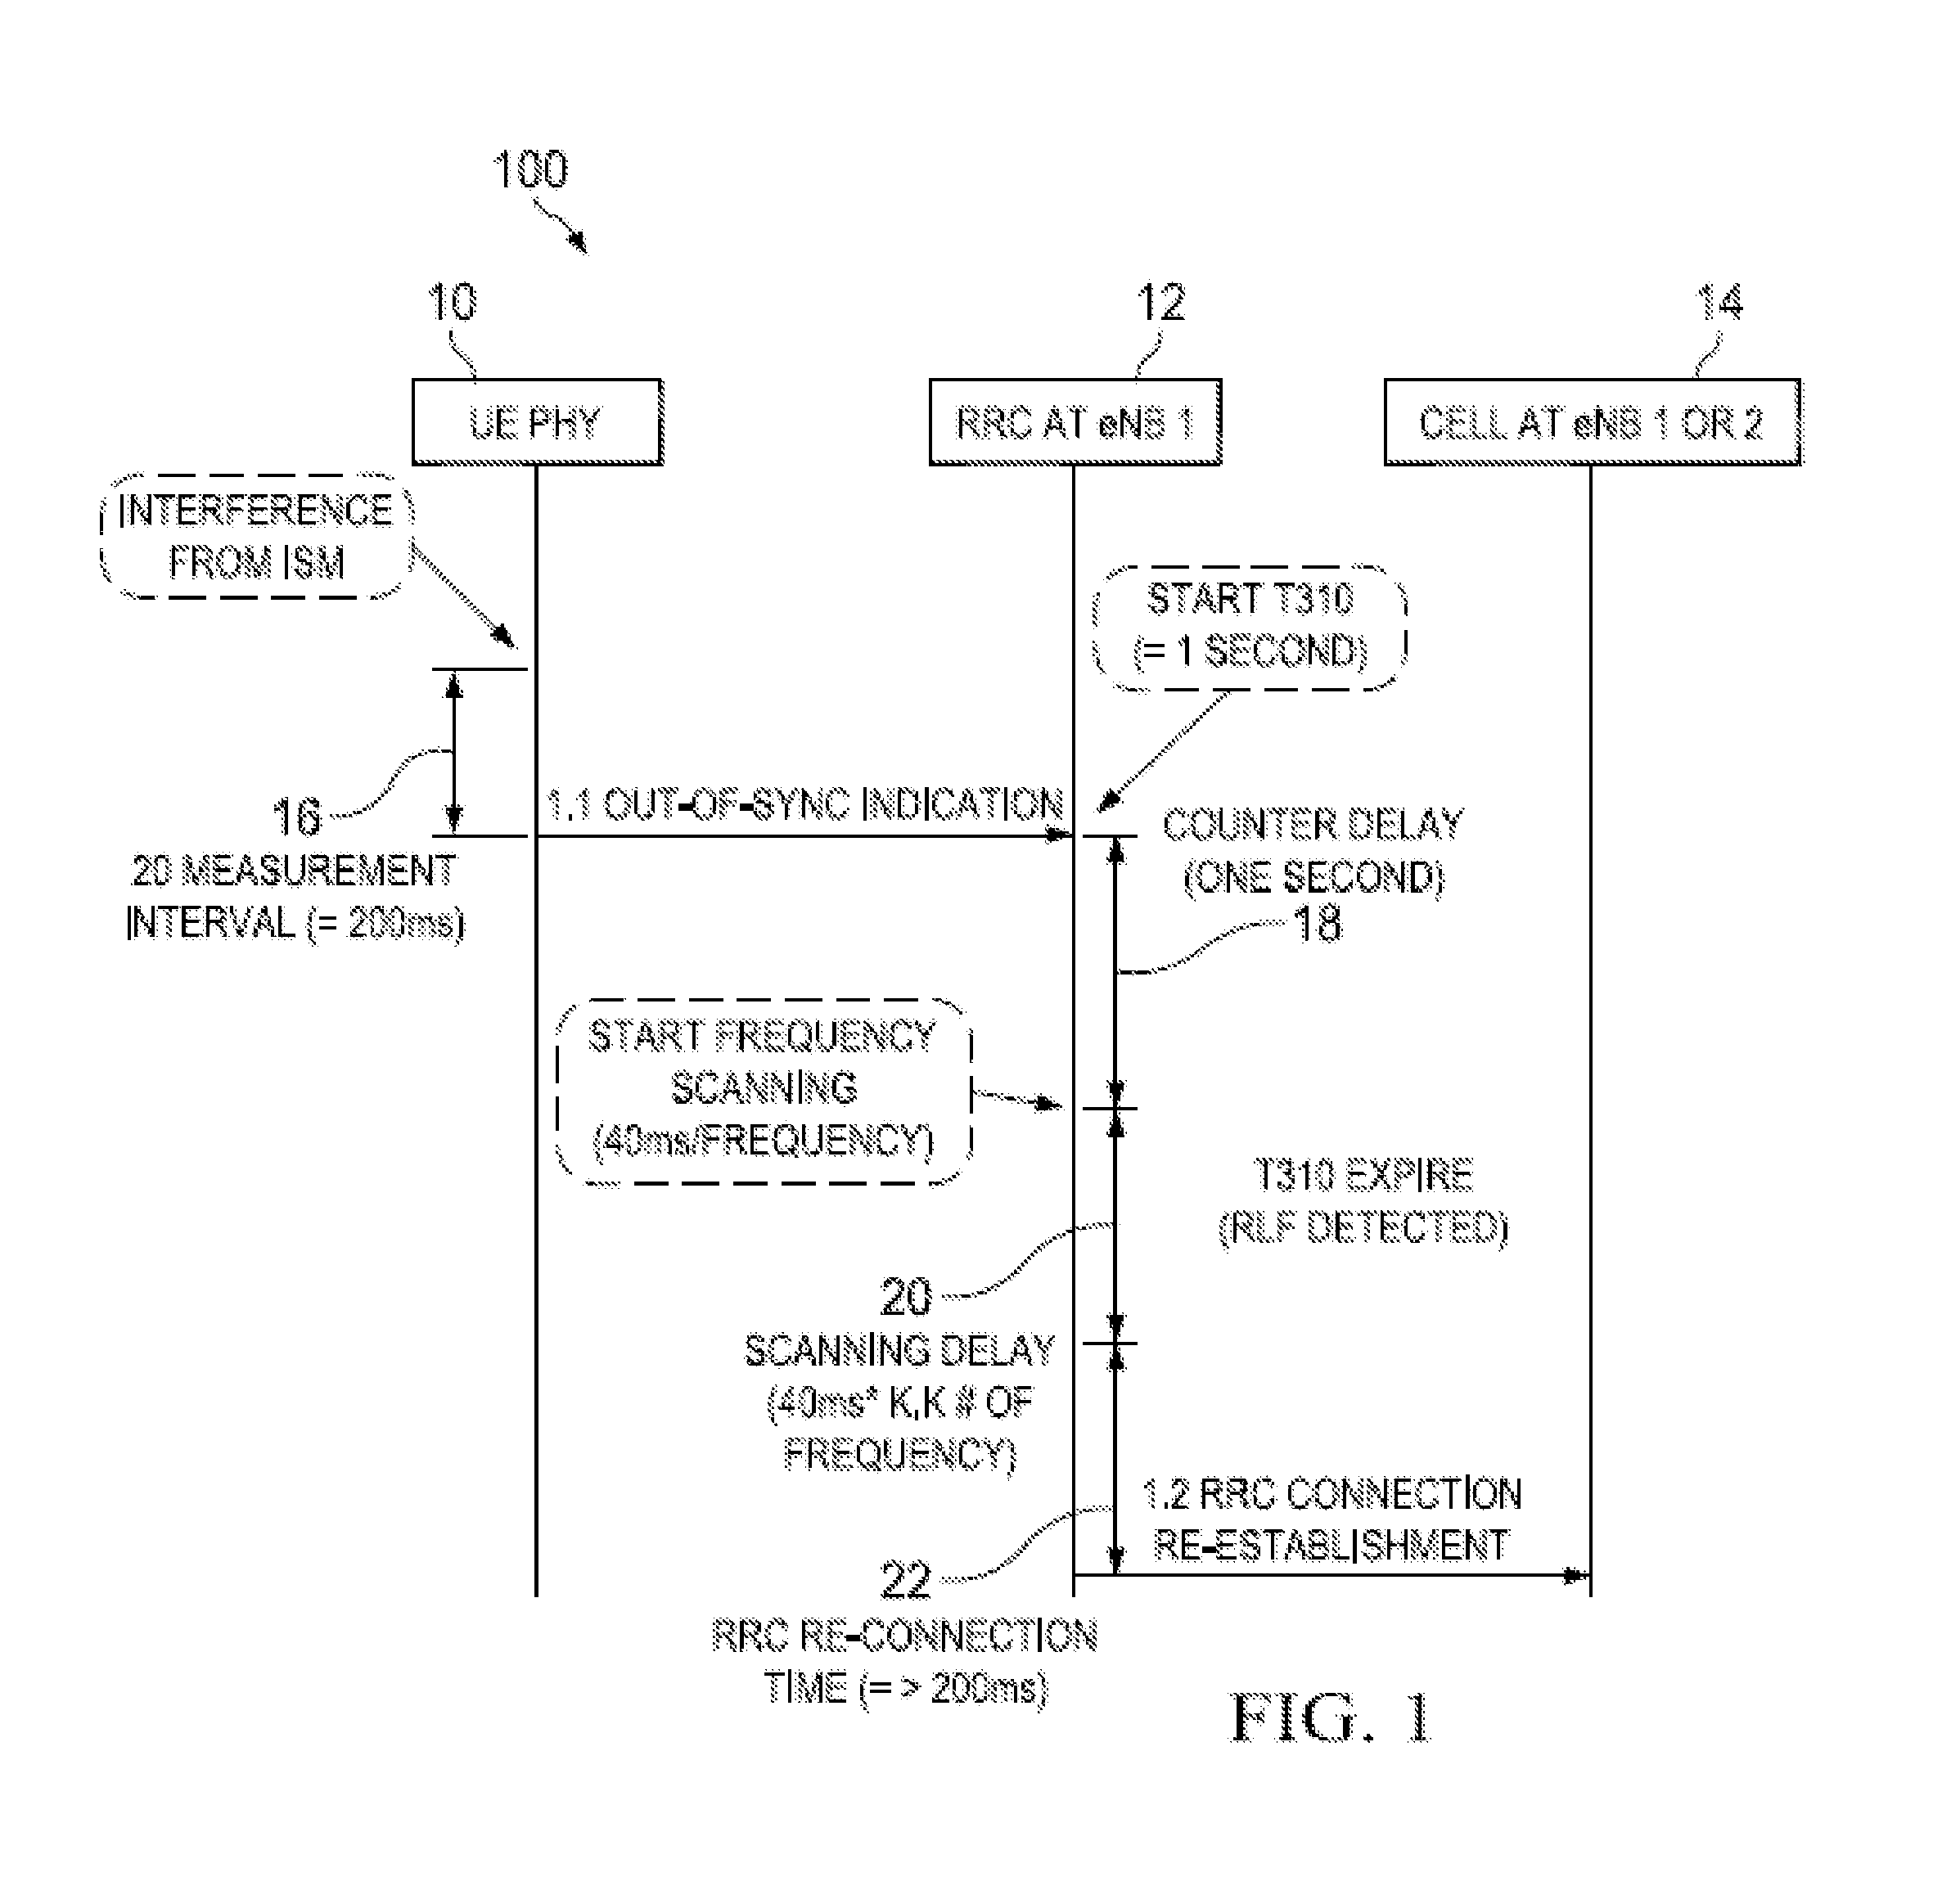 Method and Apparatus for Avoiding In-Device Coexistence Interference with Keeping Time Update for Handover